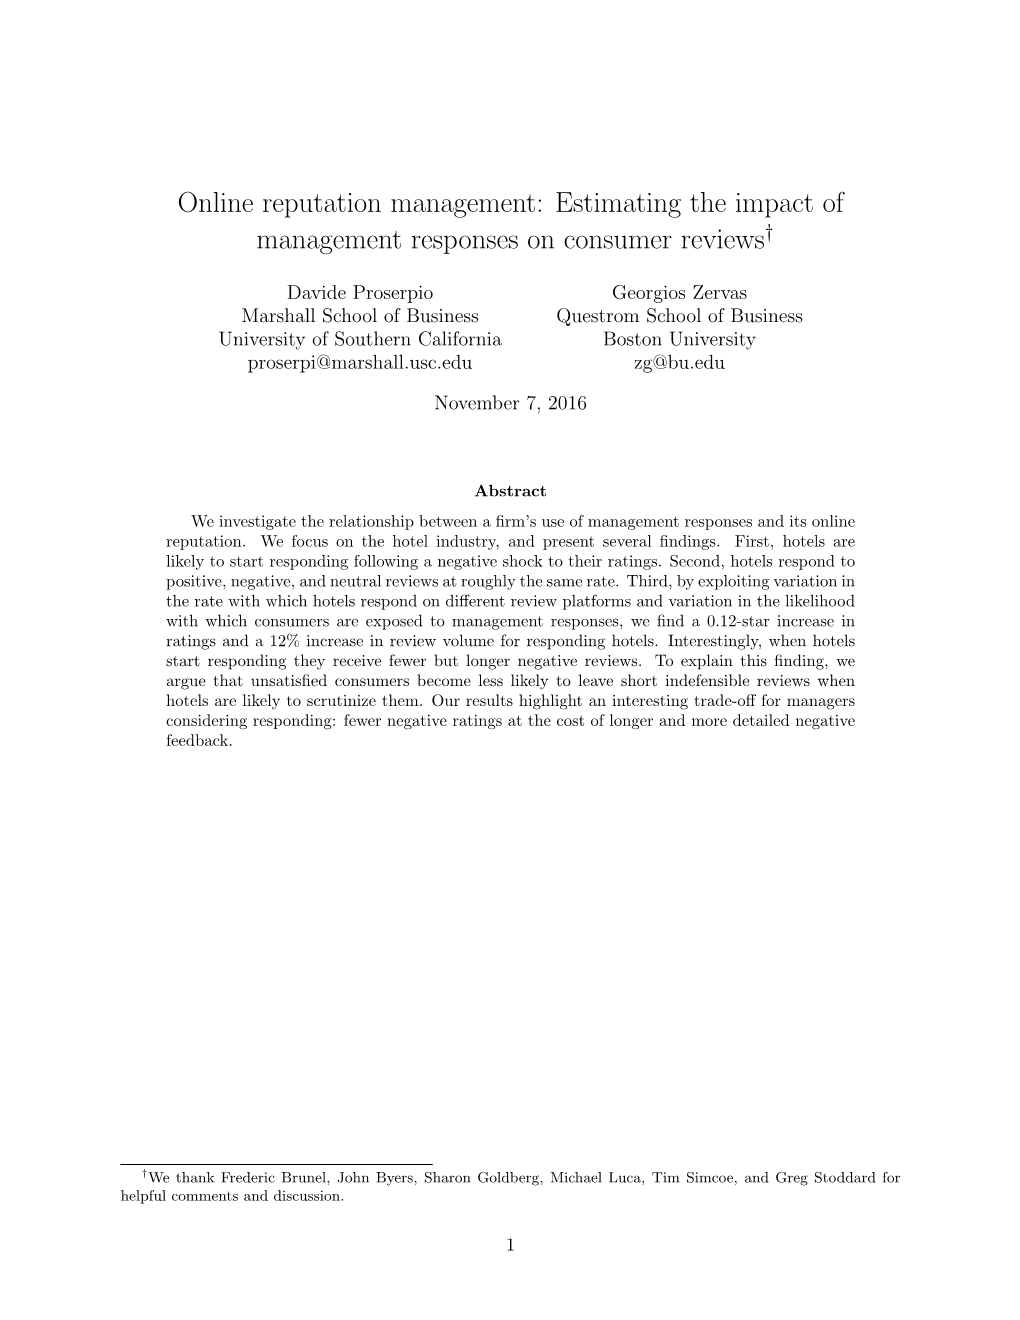 Estimating the Impact of Management Responses on Consumer Reviews†